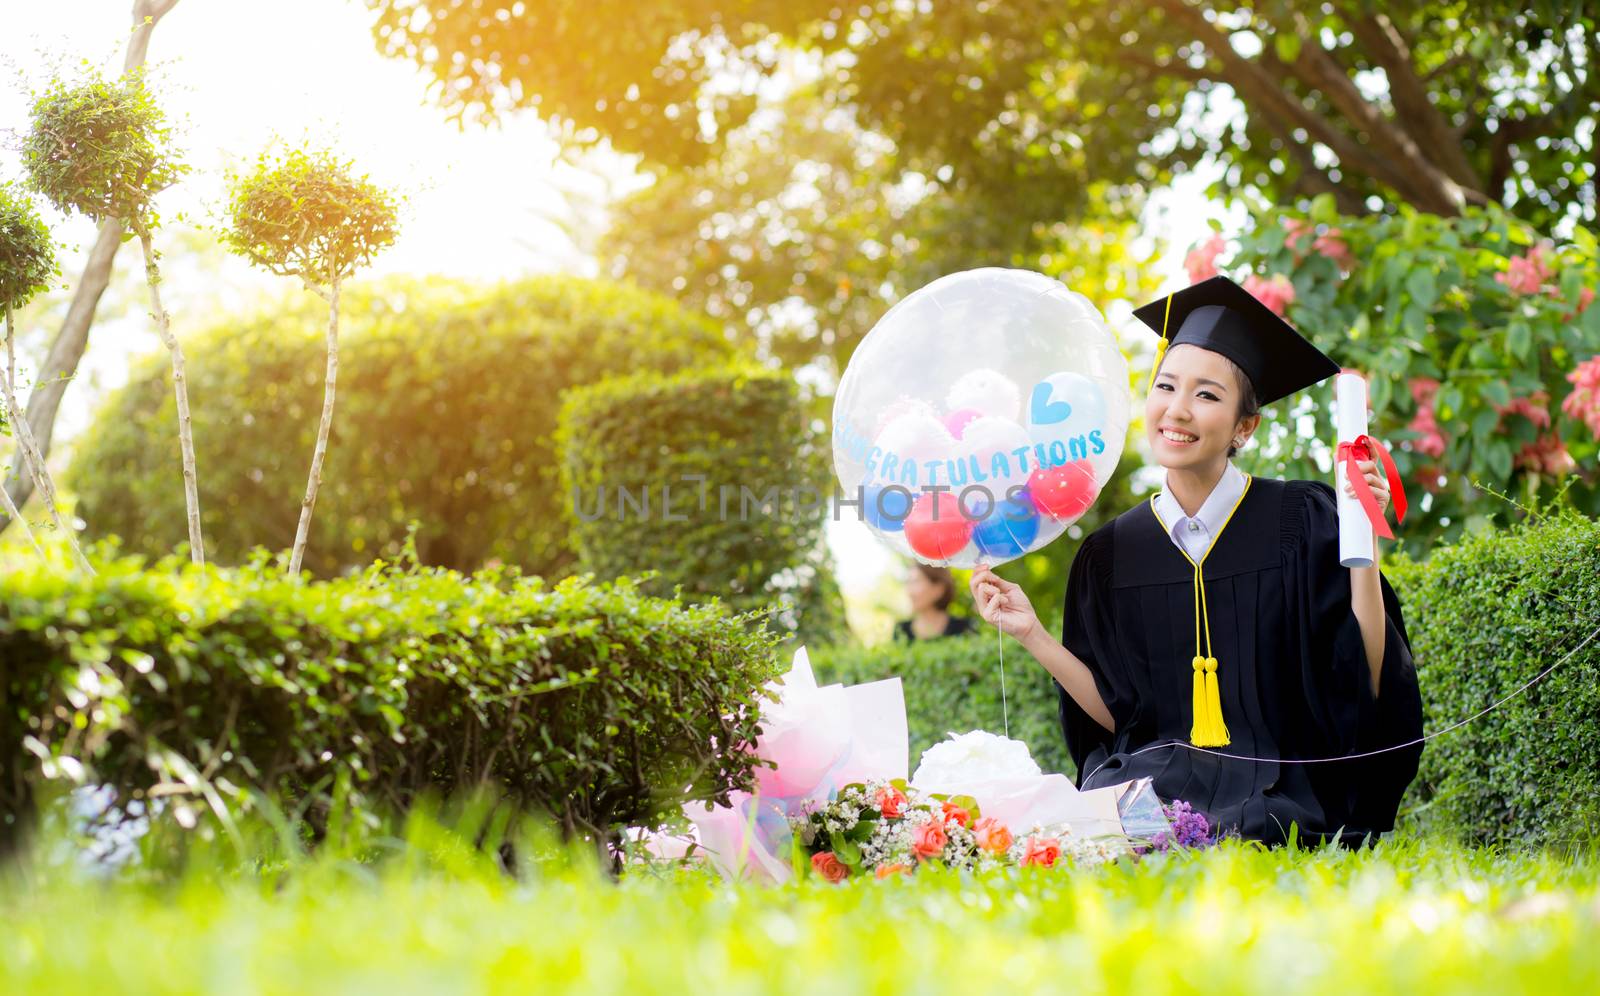 Happy graduated student girl - congratulations of education succ by nnudoo